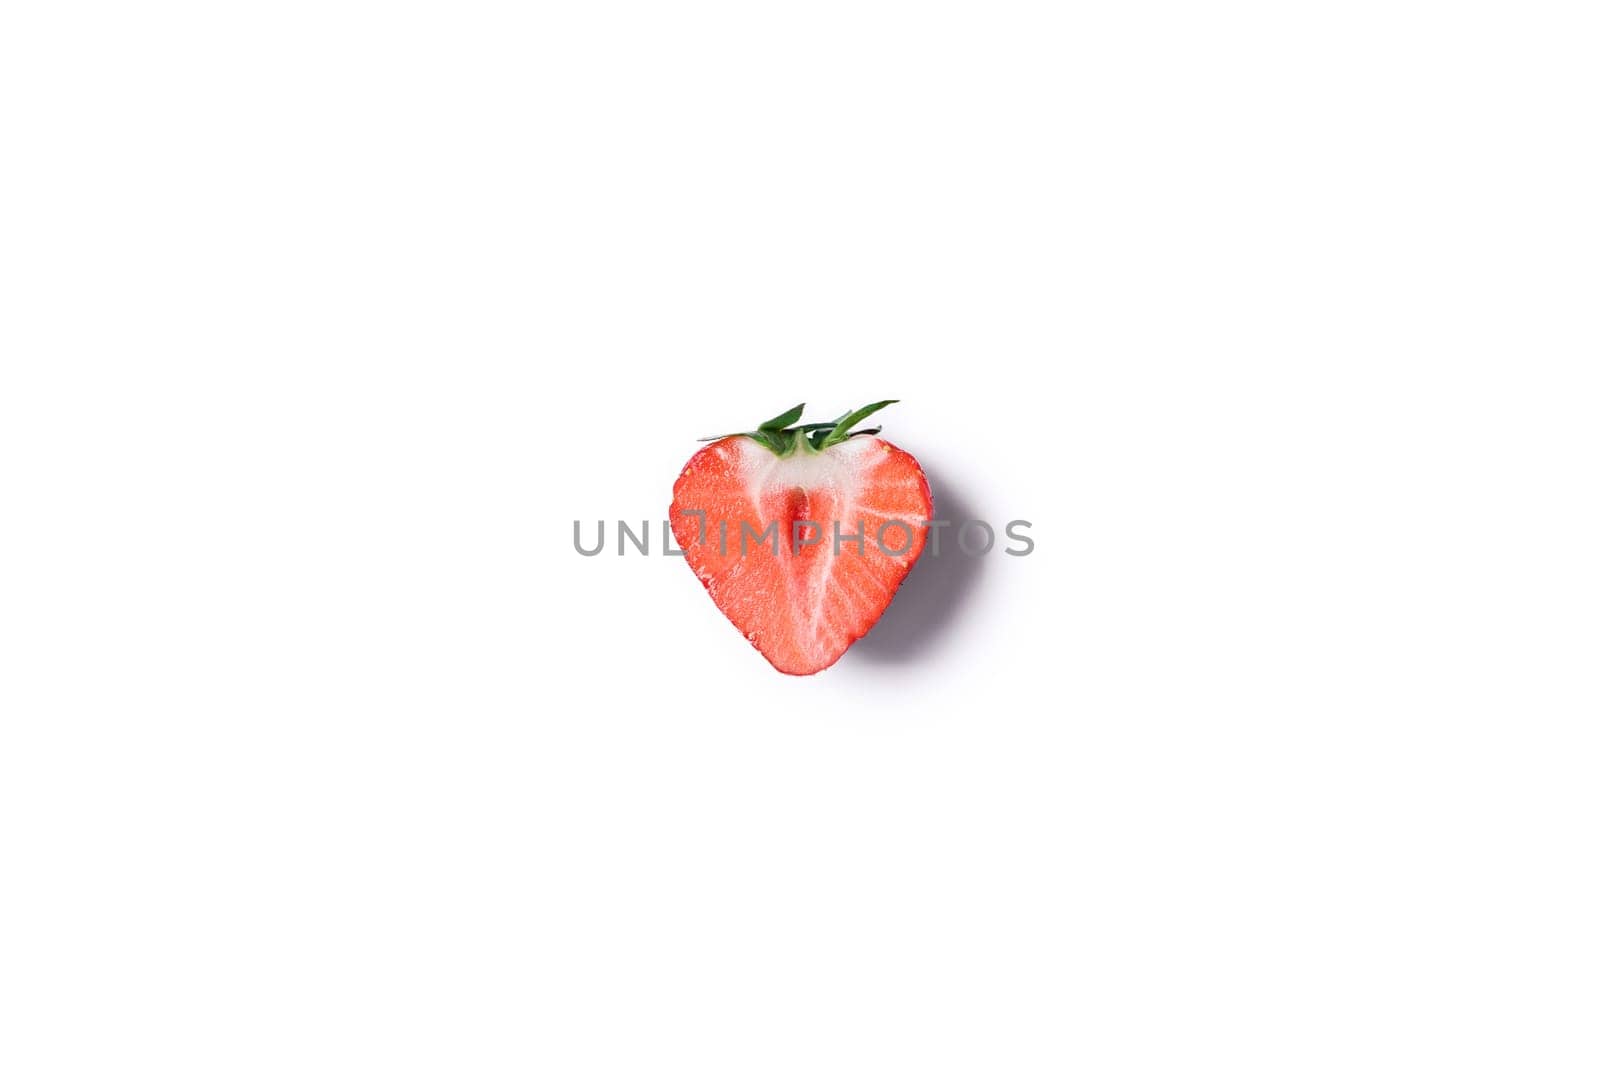 Sweet summer strawberry on an isolated white background.